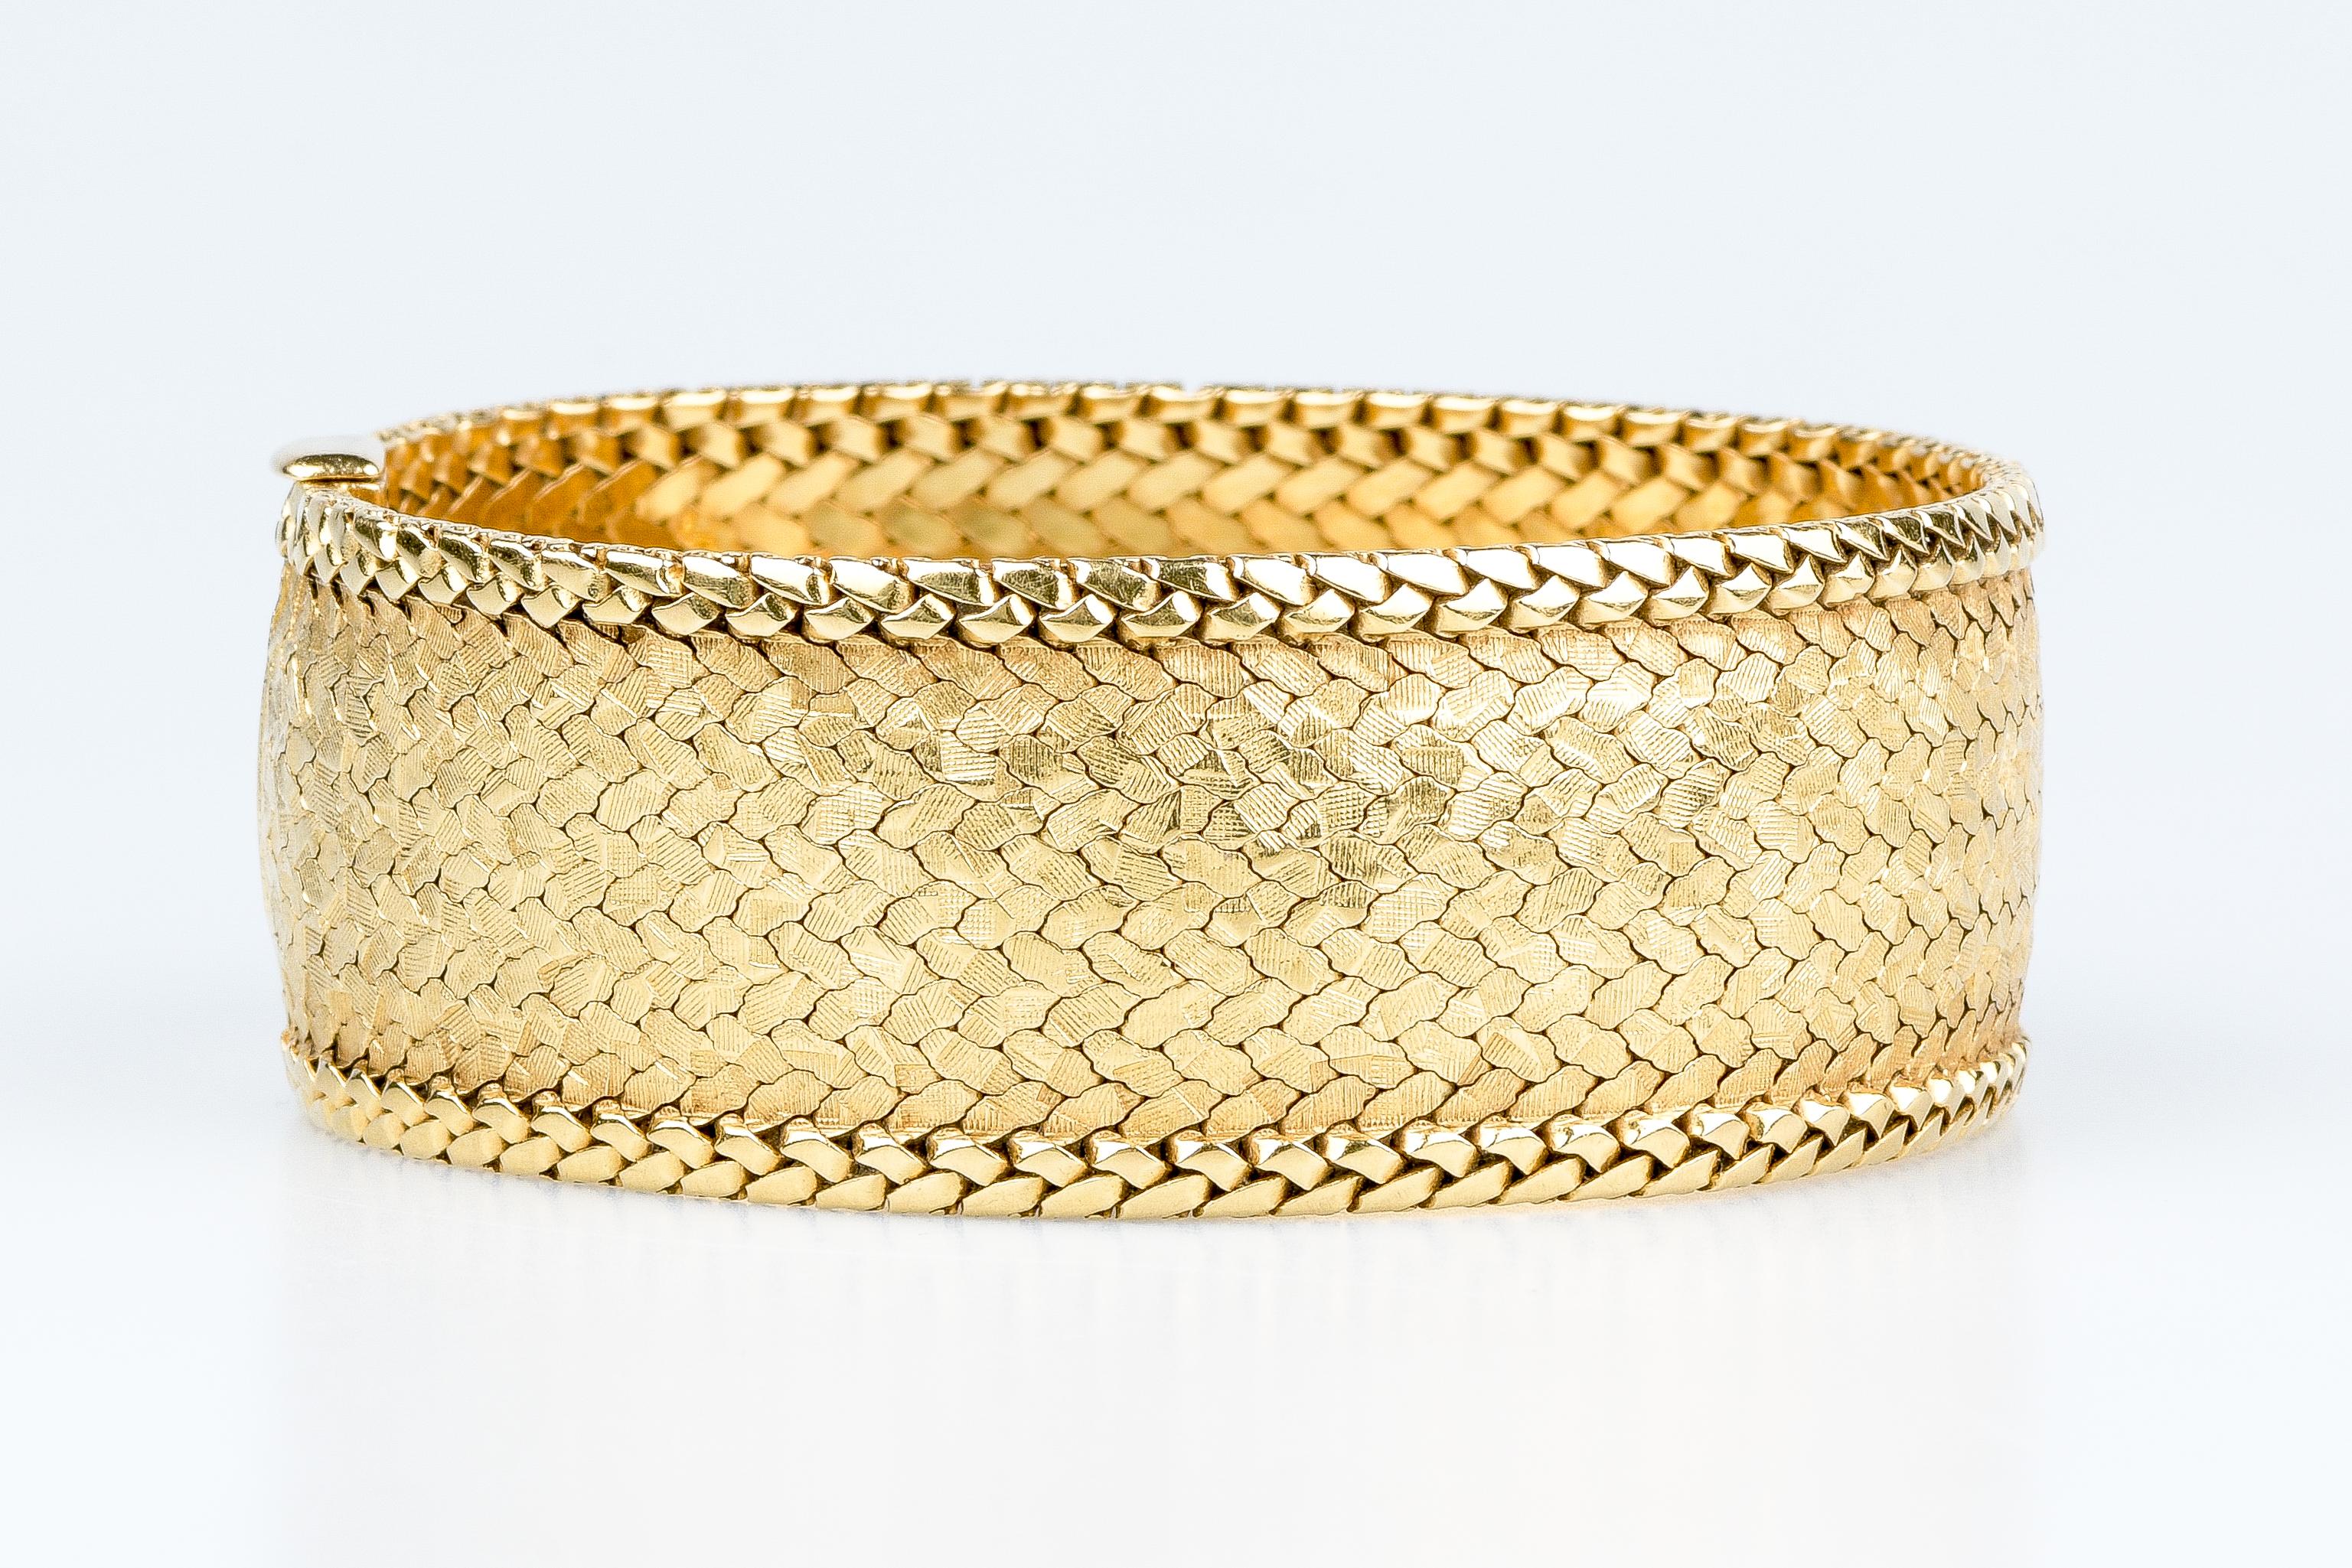 18 carat yellow gold cuff bracelet designed with a flat mesh.

 Weight : 61.10 gr. 

Dimensions : 19 x 2.22 cm

Jewel delivered in a luxurious box. 

Condition : Like new

18 carat gold eagle head hallmark on the jewel. 

Secure and express delivery